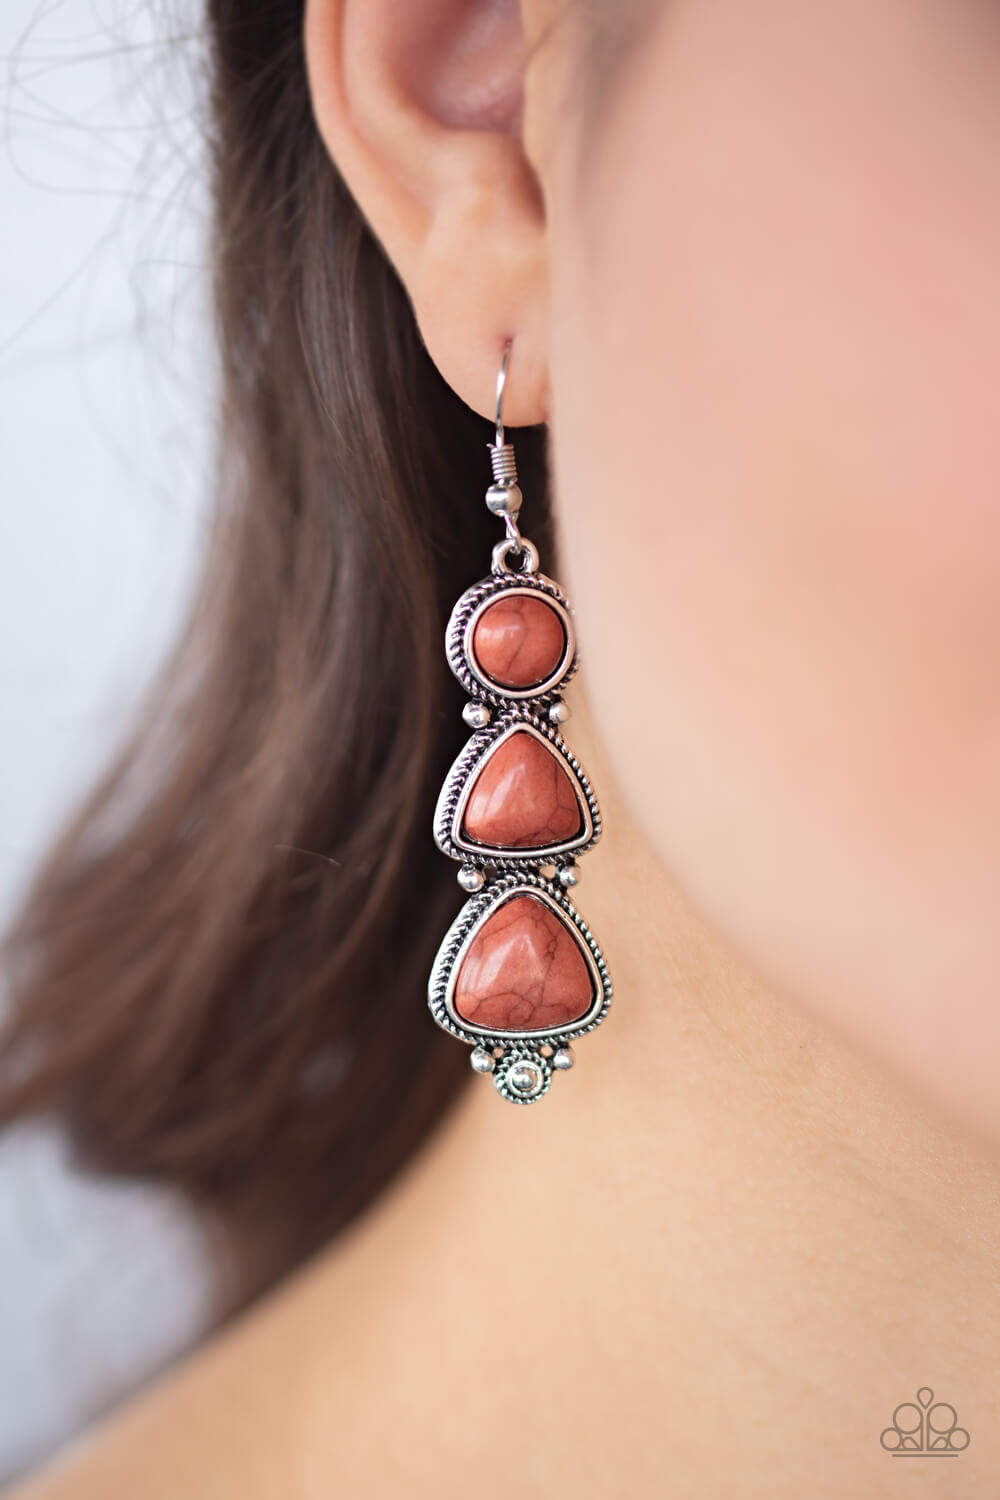 New Frontier - Brown Stone Earrings - Princess Glam Shop